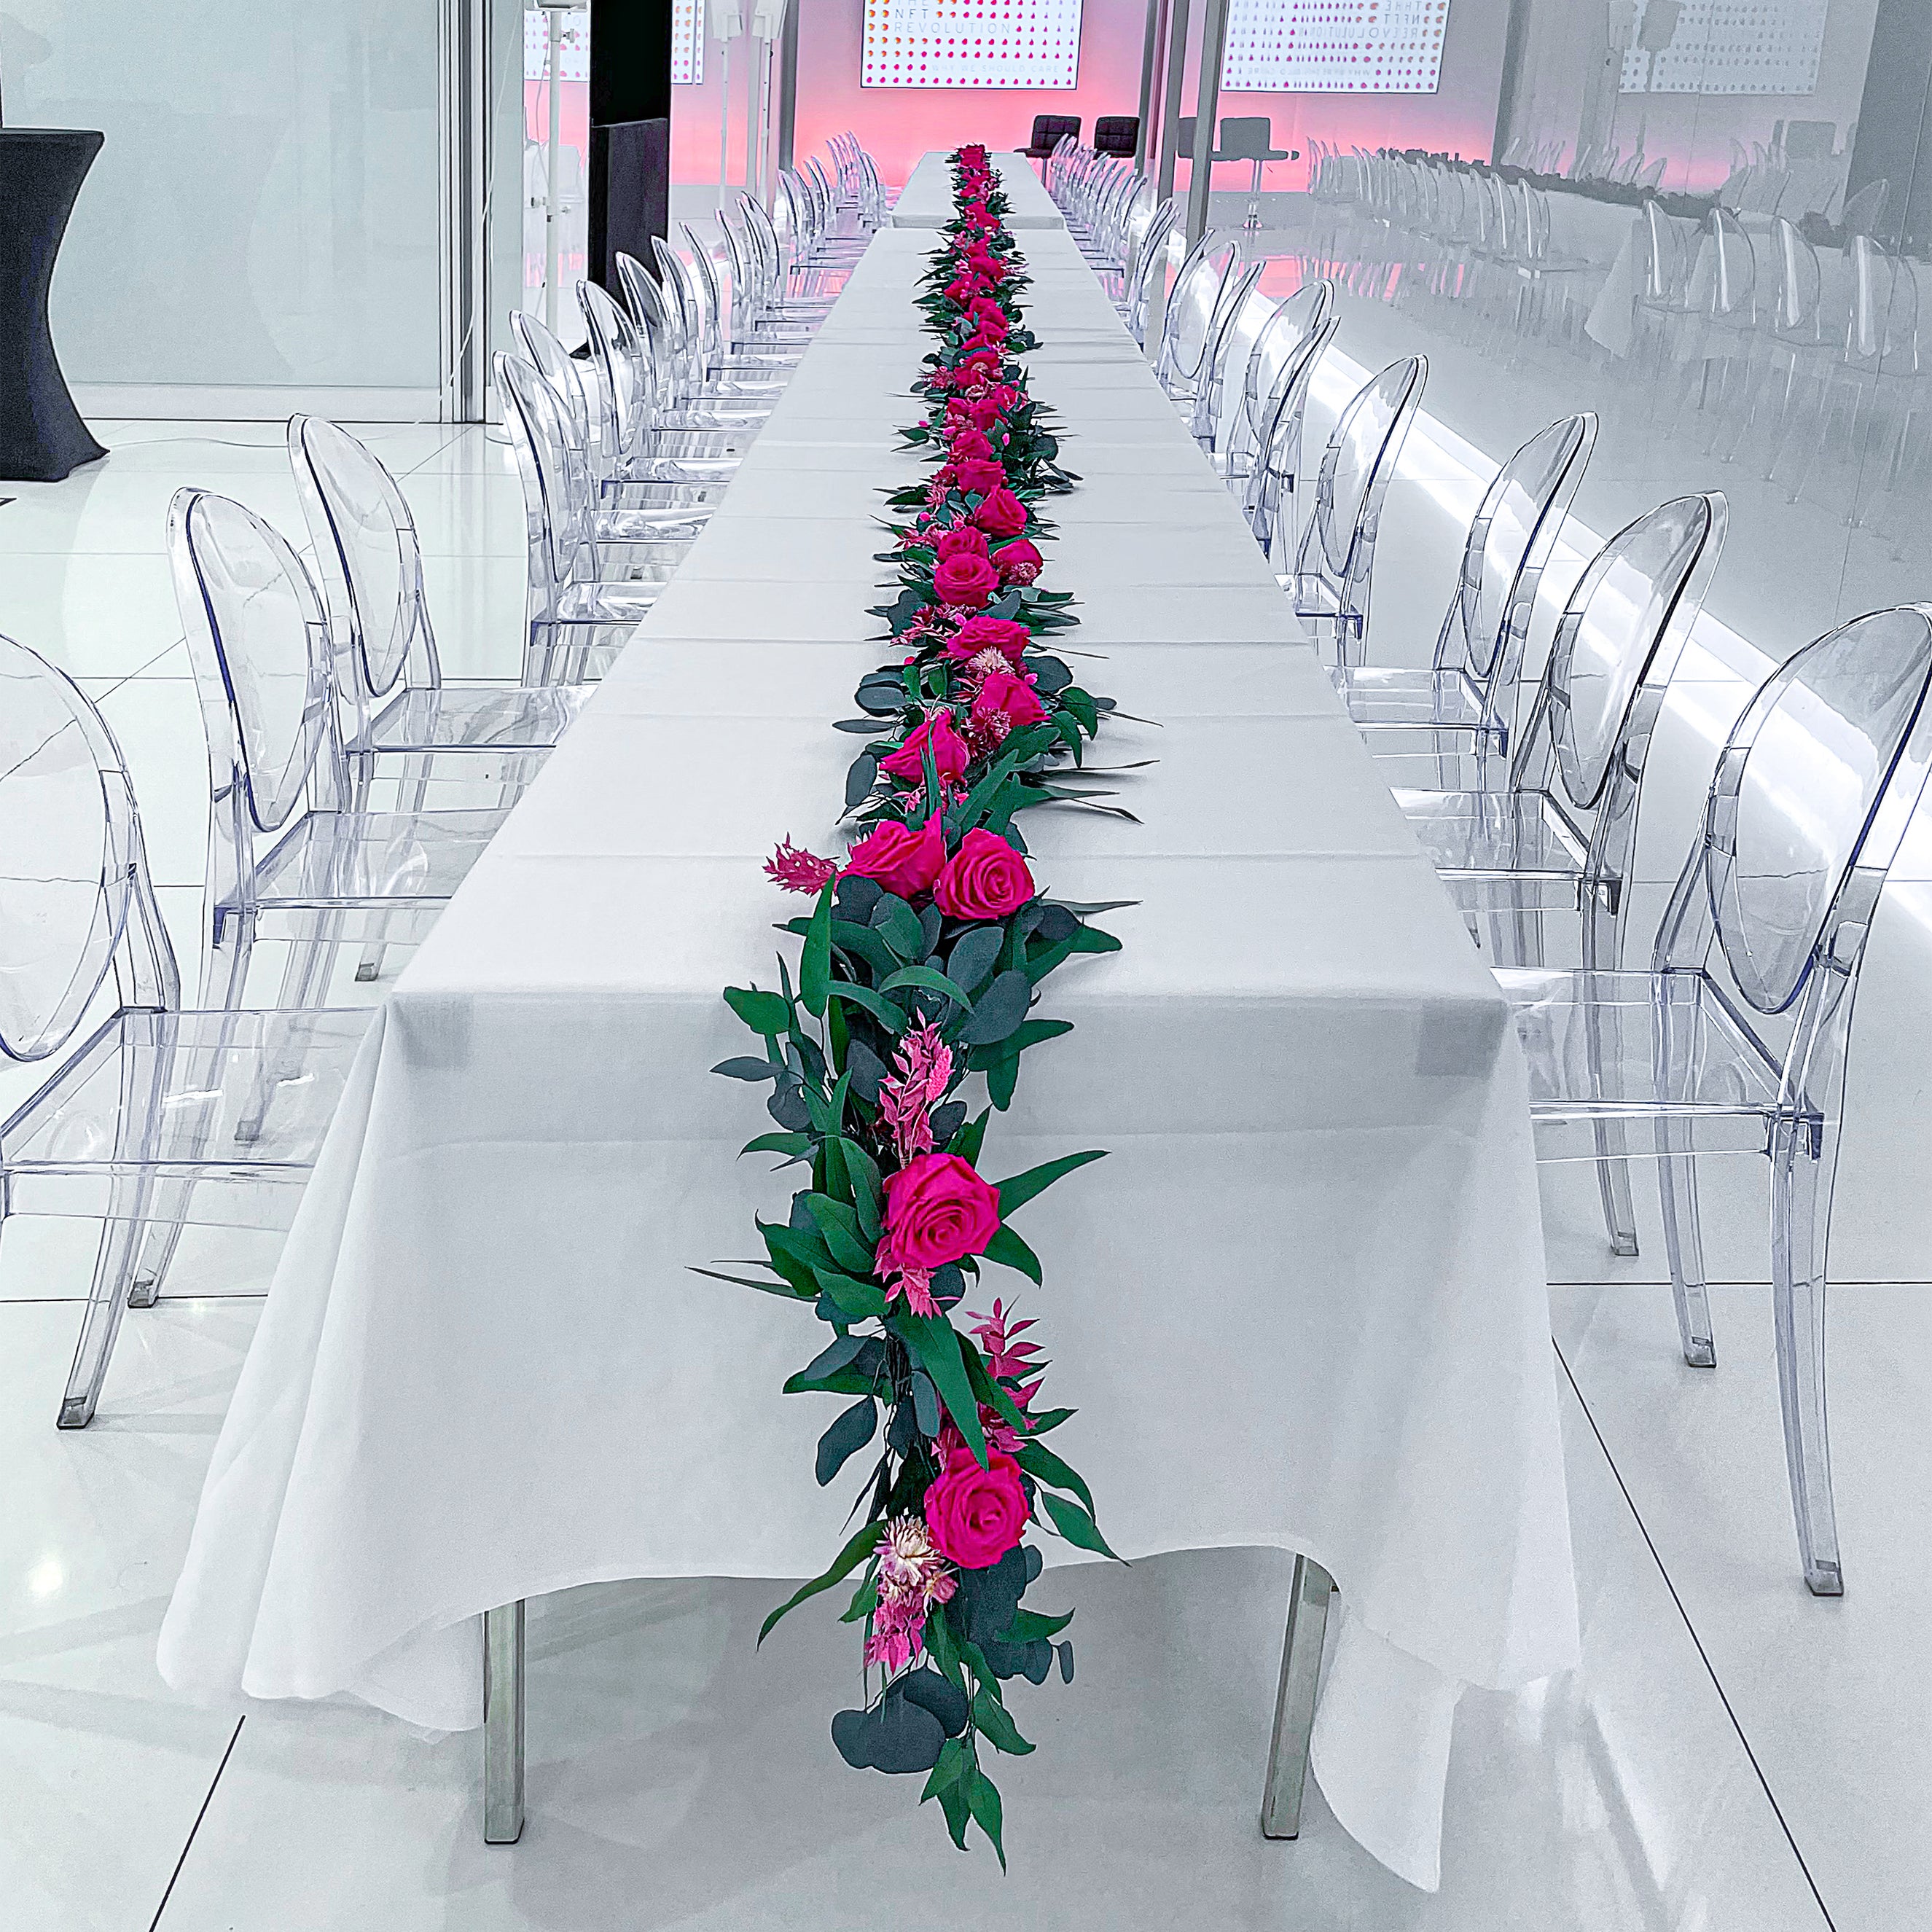 Event florist Amaranté London created a bespoke floral wreath as a part of an event for Citi bank, using a range of sustainable stems and infinity roses. 